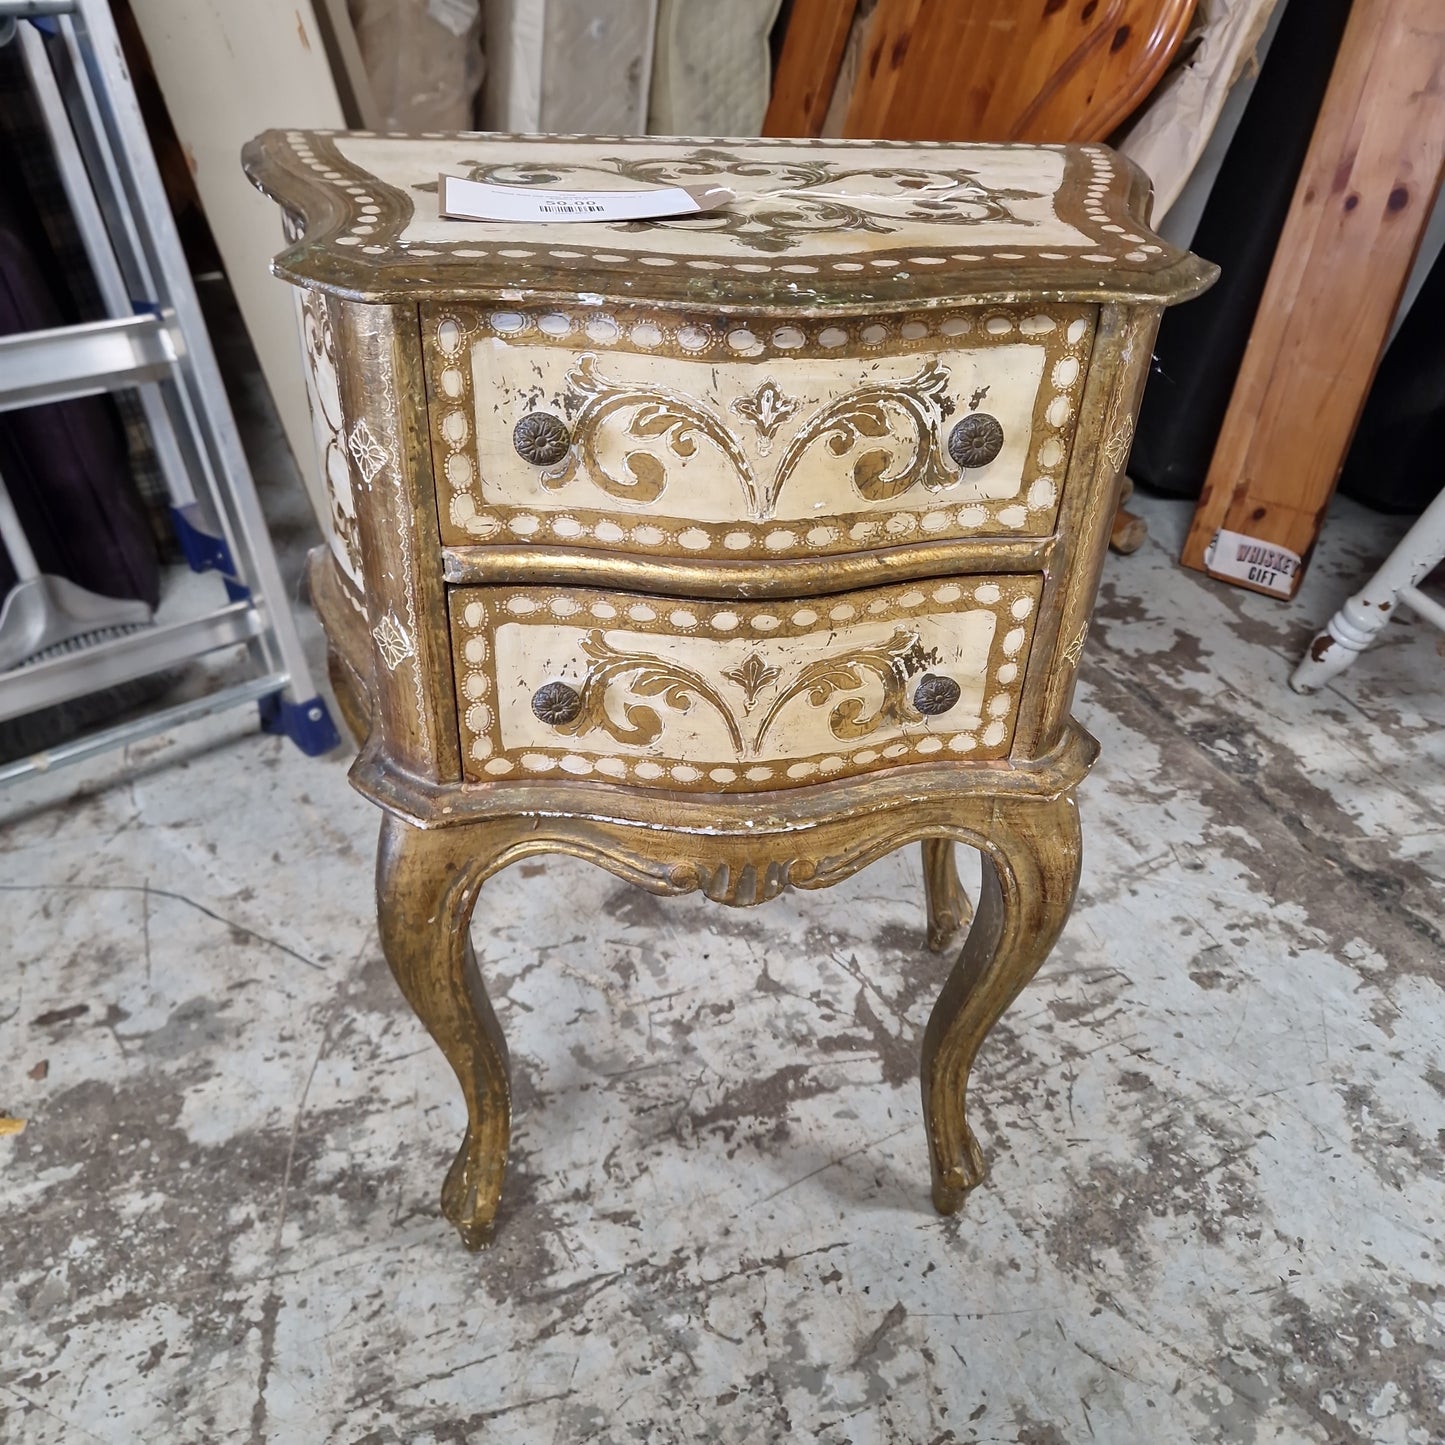 Antique Gold and white ornate bedside table with 2 drawers 3124